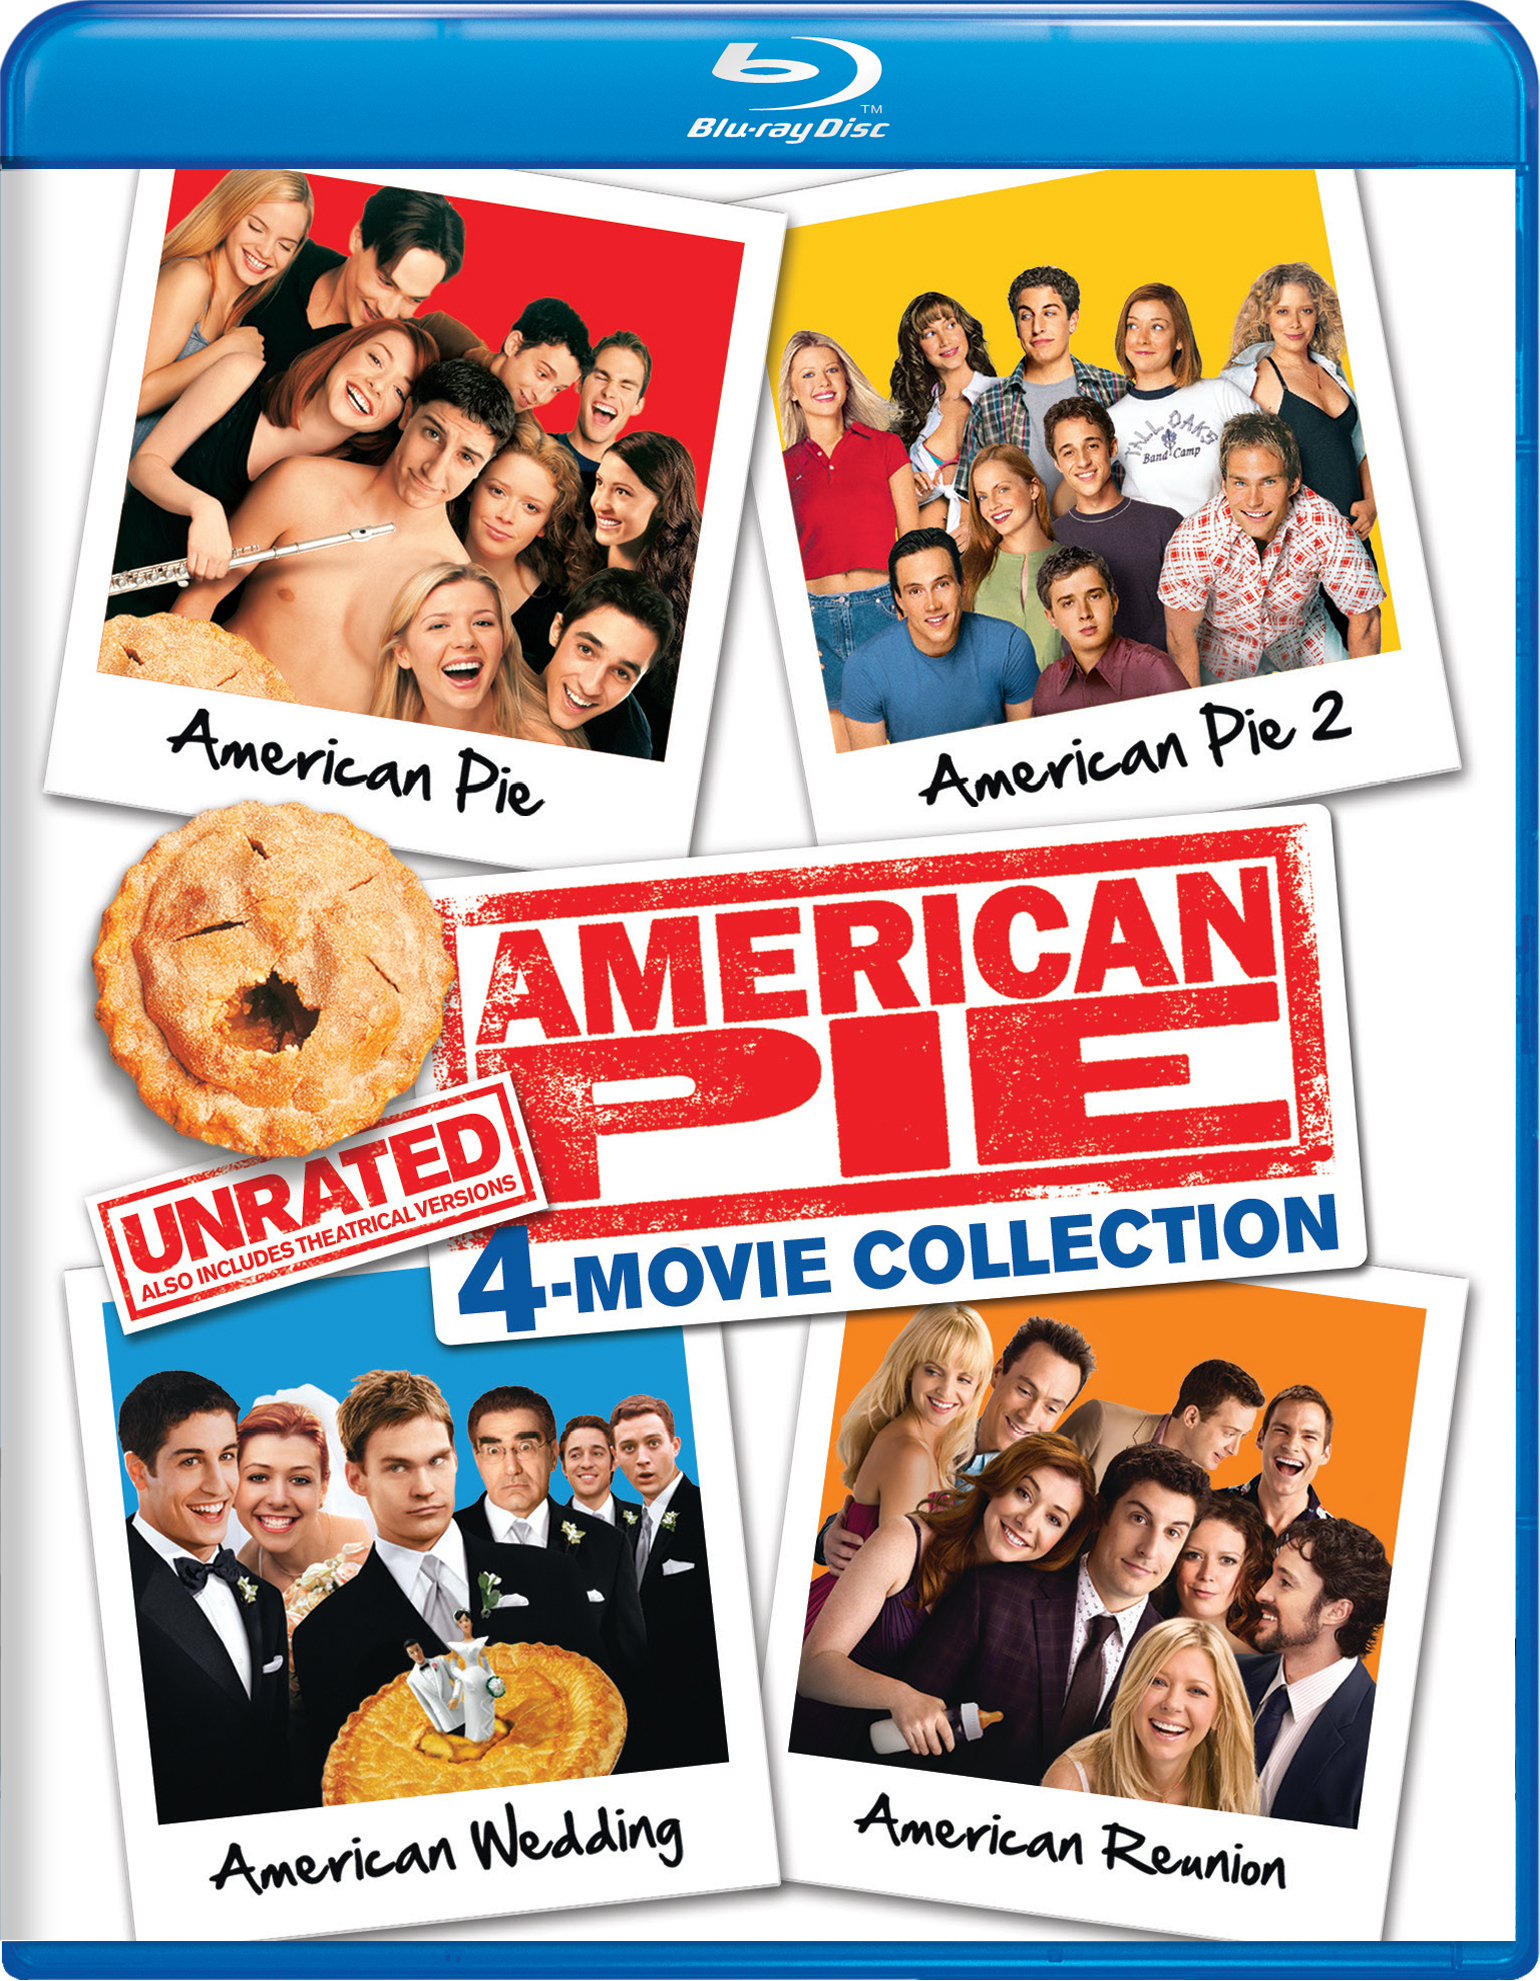 American Pie: 4 Play (Blu-ray Unrated) - Blu-ray   - Comedy Movies On Blu-ray - Movies On GRUV